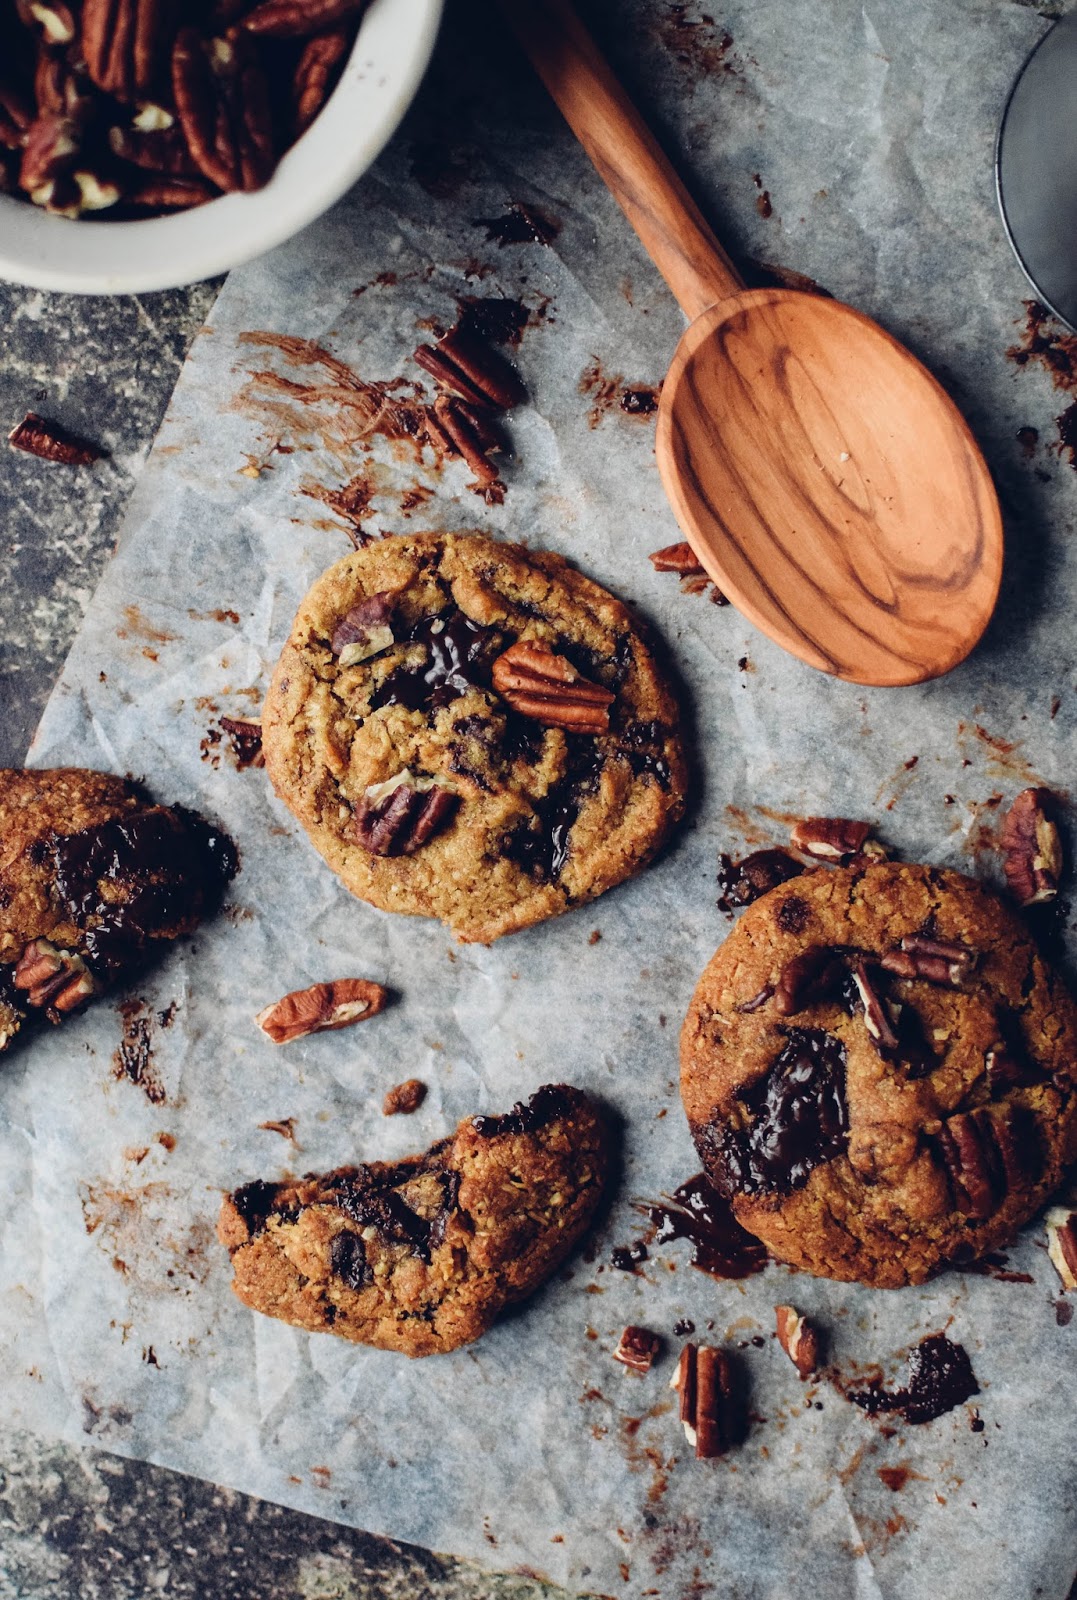 These chocolate chip cookies use ground pecans and coconut in the flour mixture and the darkest chocolate to give them a deep, sophisticated taste, this is a cookie for the adults. No kids allowed. Unless they've been really good...